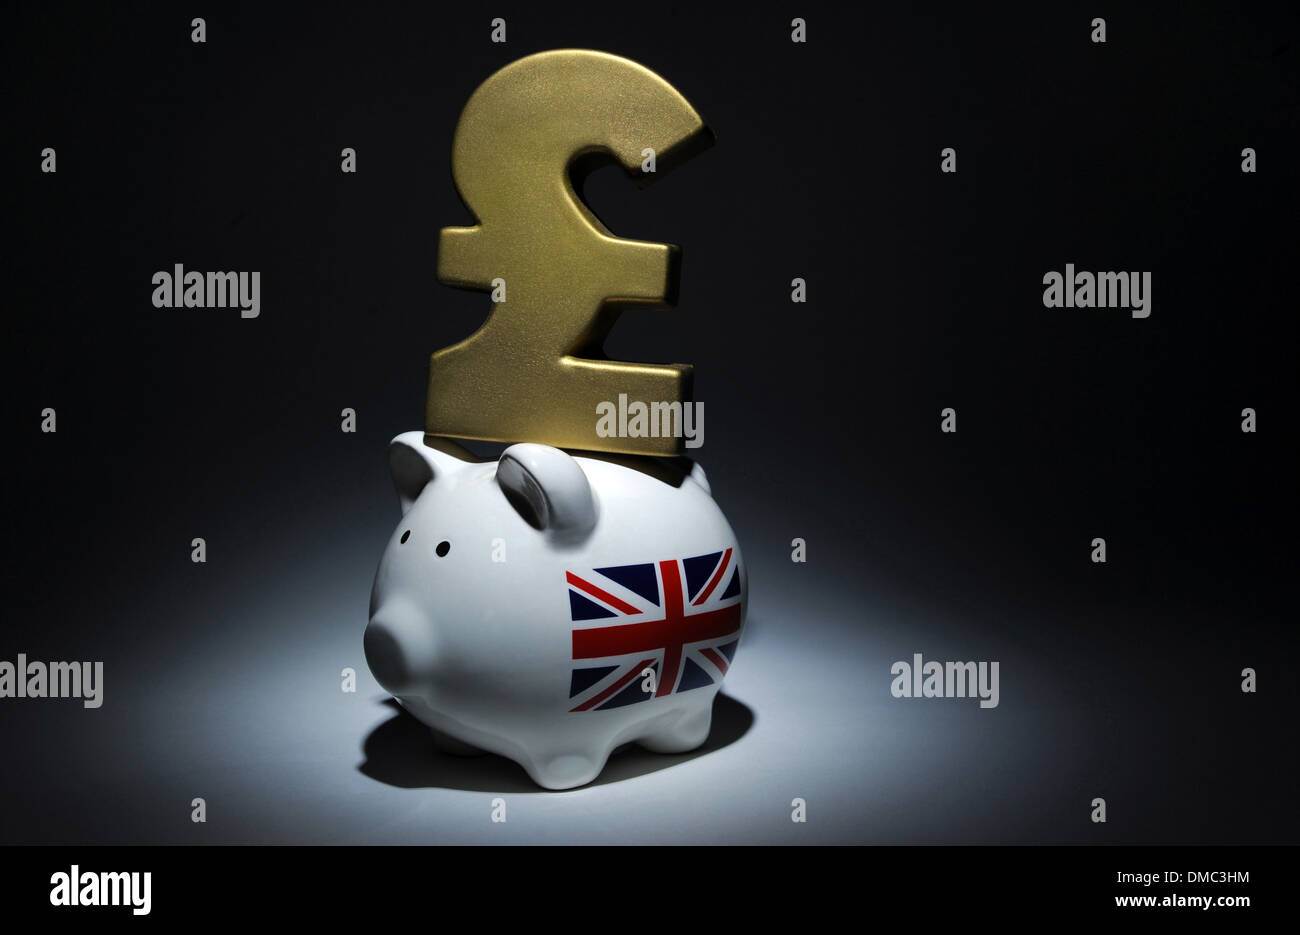 PIGGY BANK WITH POUND SIGN AND UNION JACK RE BRITISH ECONOMY SAVINGS INCOMES HOUSEHOLD BUDGETS GDP WAGES INFLATION MONEY COST UK Stock Photo